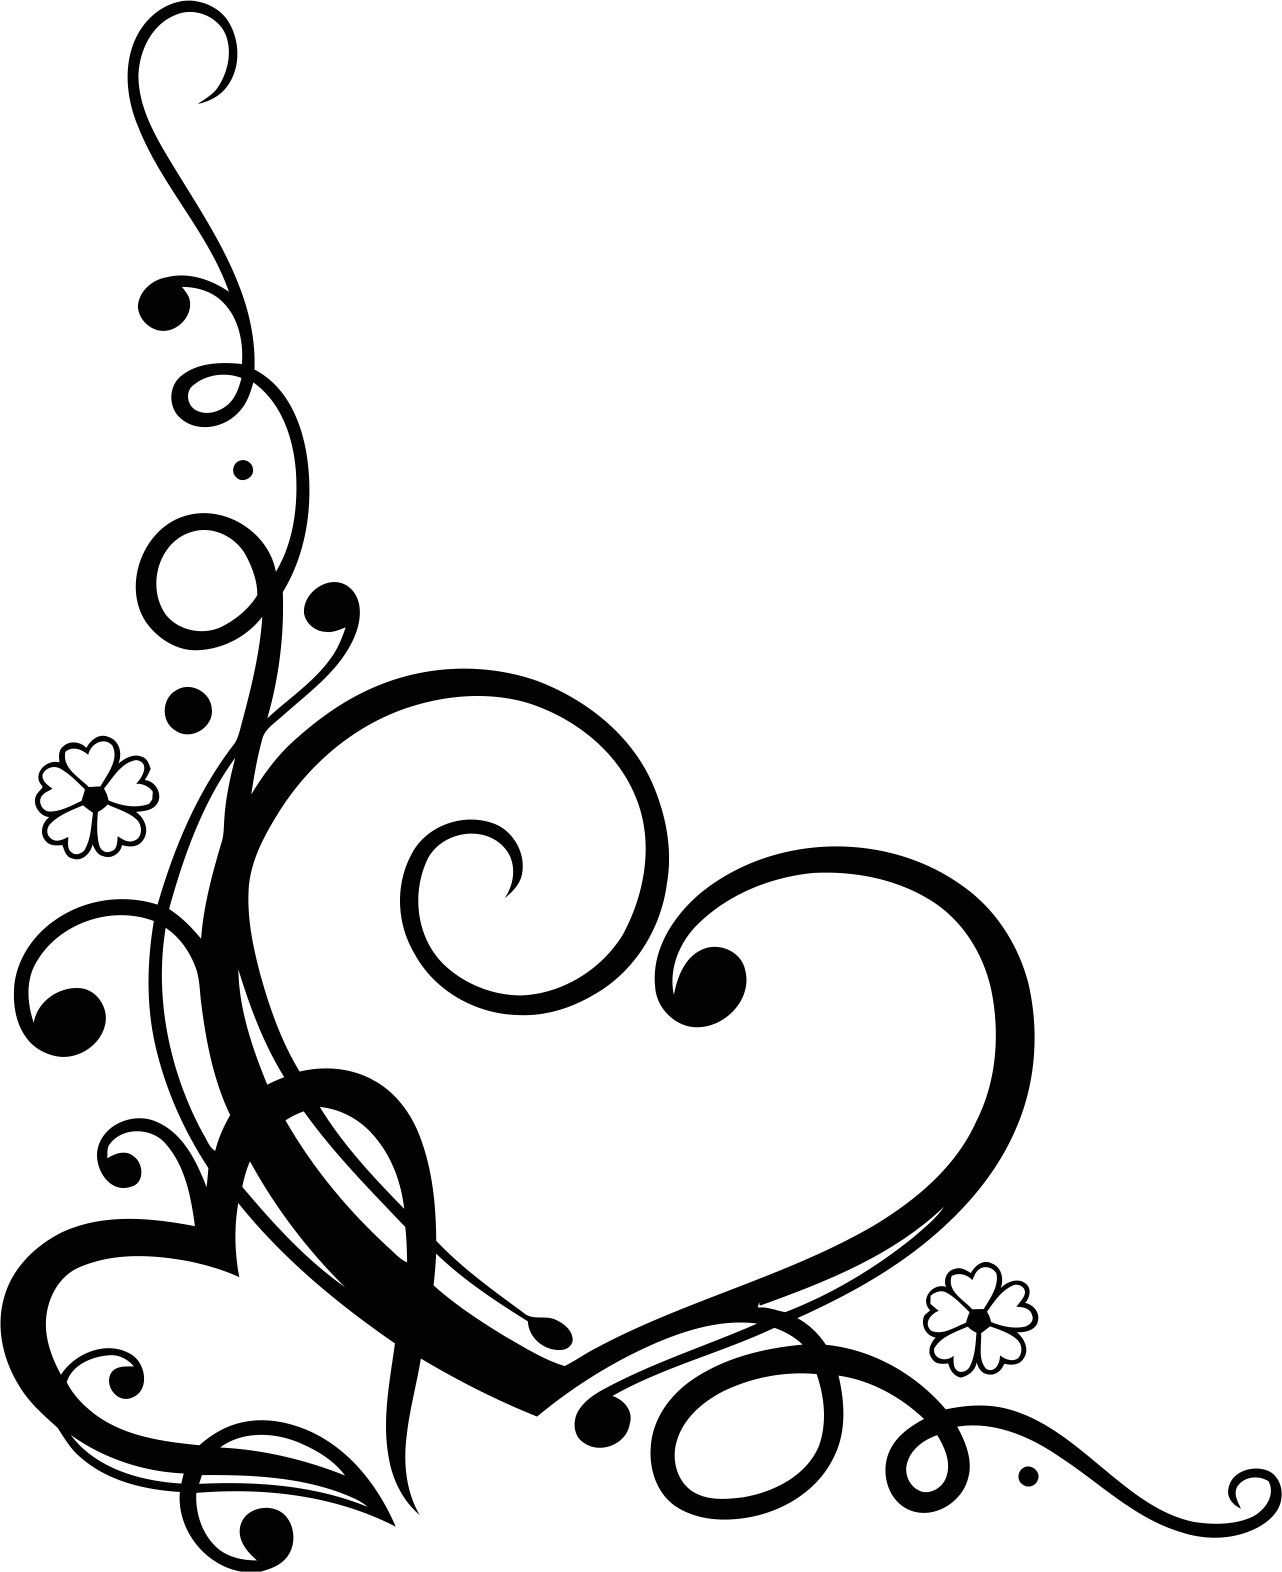 Love Heart Floral Vector Free Vector cdr Download - 3axis.co